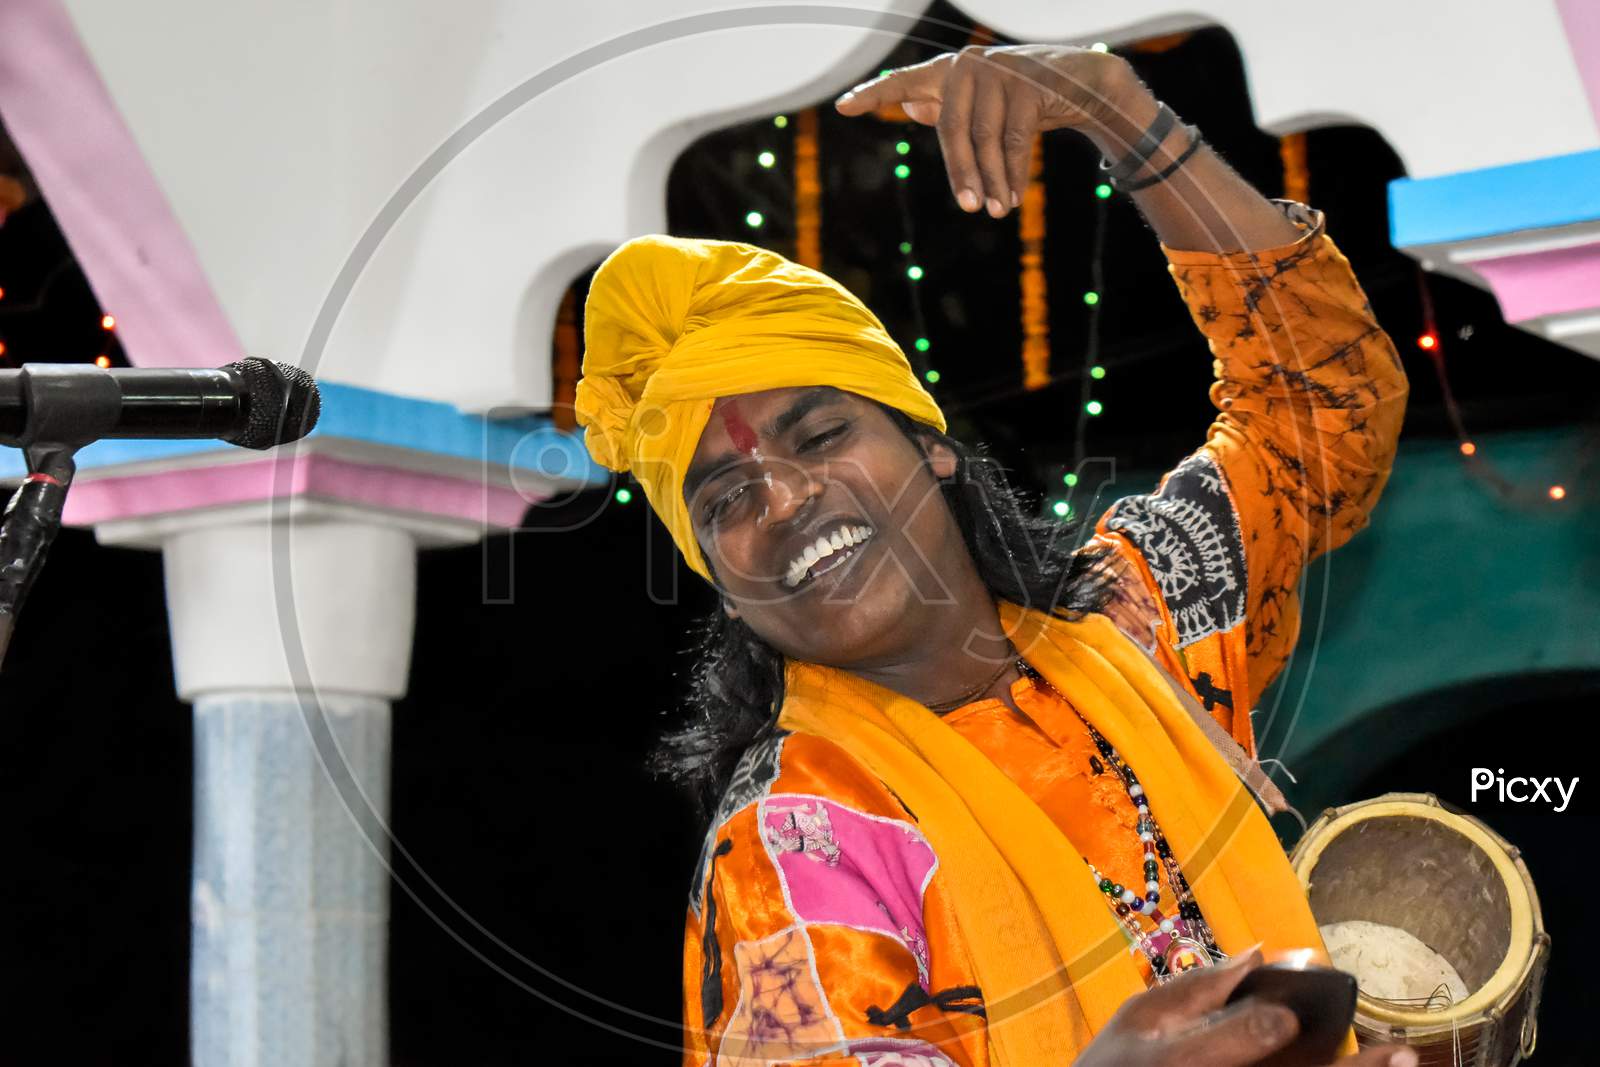 A folk singer of West Bengal performing folk songs on the stage with his local string instrument